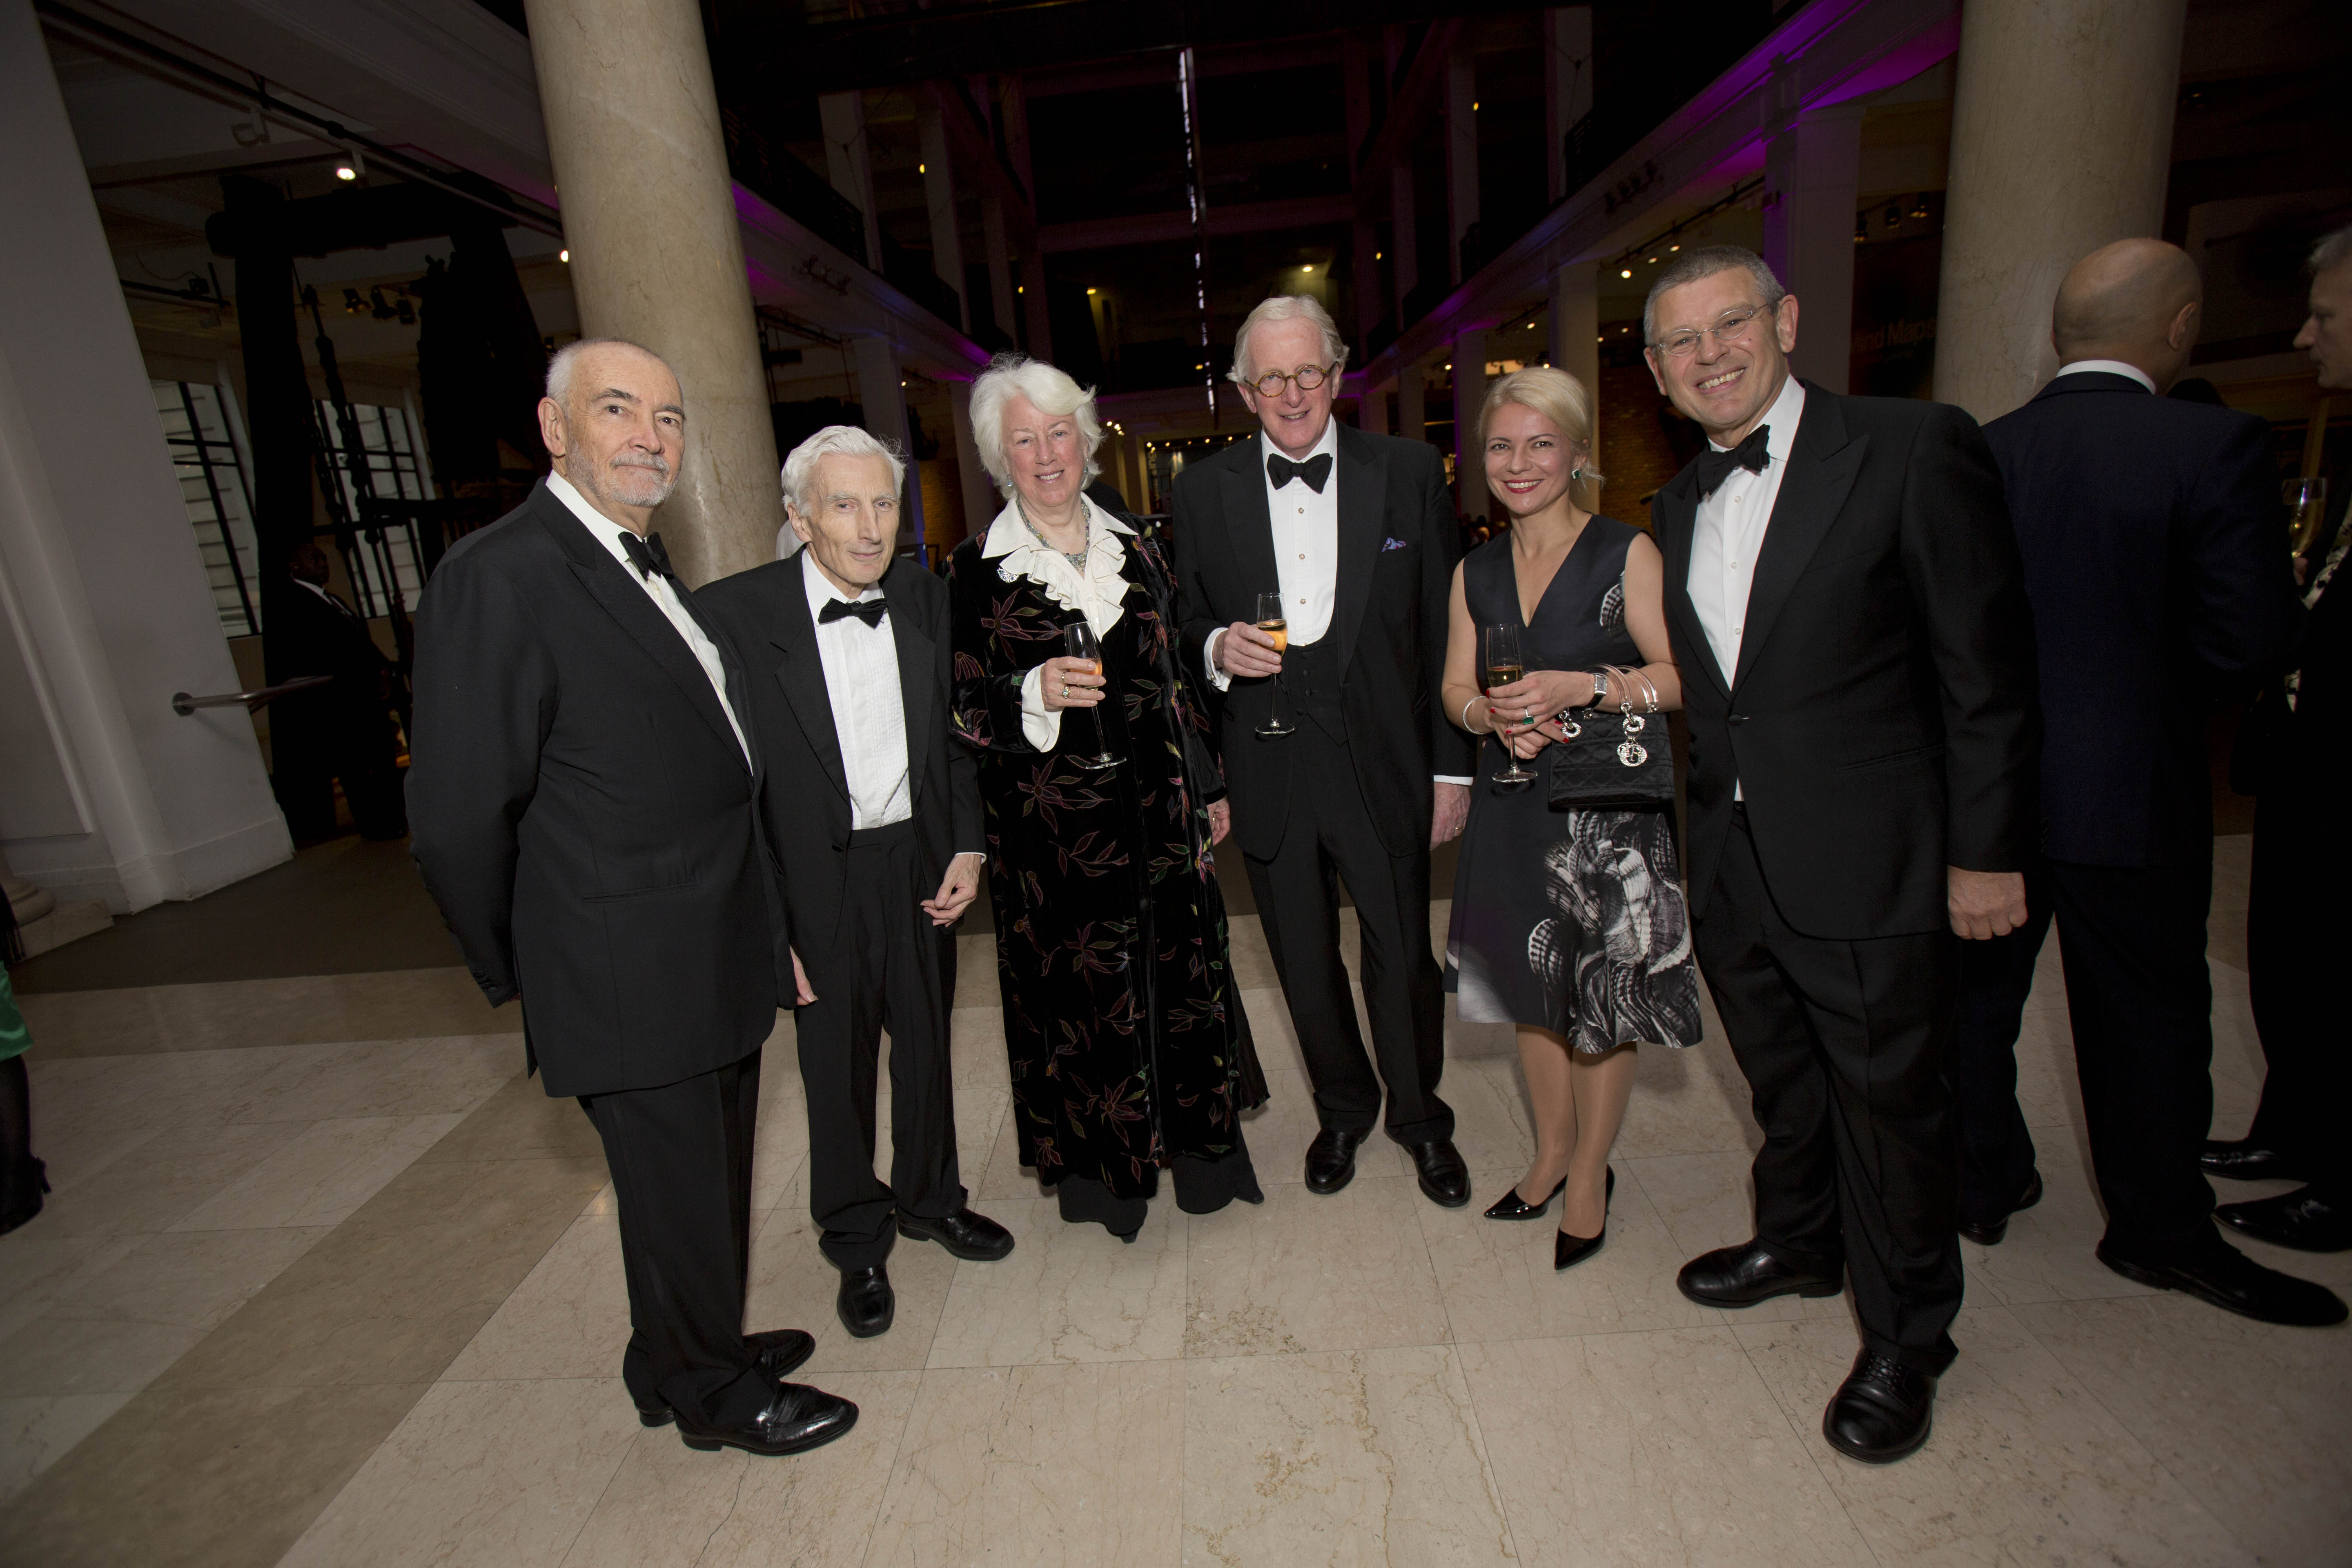 Michael Wilson OBE, The Right Hon Lord Rees of Ludlow, Lady Elise Becket Smith, Sir Martin Smith KBE, Veronika Covington and Howard Covington attend the 2014 Science Museum Director's Annual Dinner © Tim Anderson